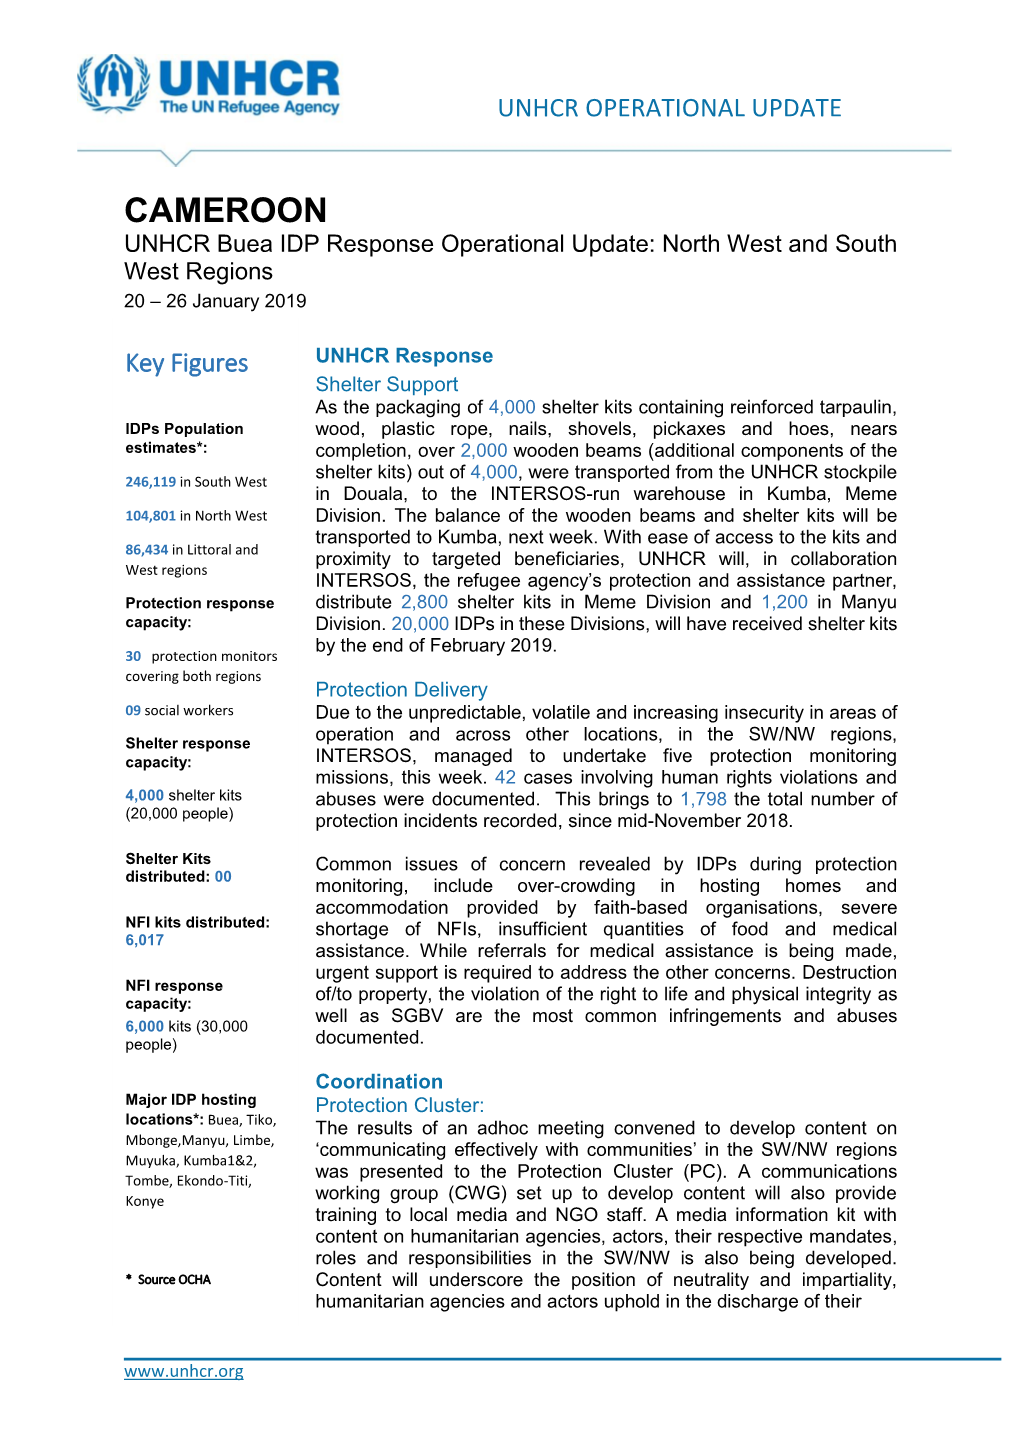 CAMEROON UNHCR Buea IDP Response Operational Update: North West and South West Regions 20 – 26 January 2019